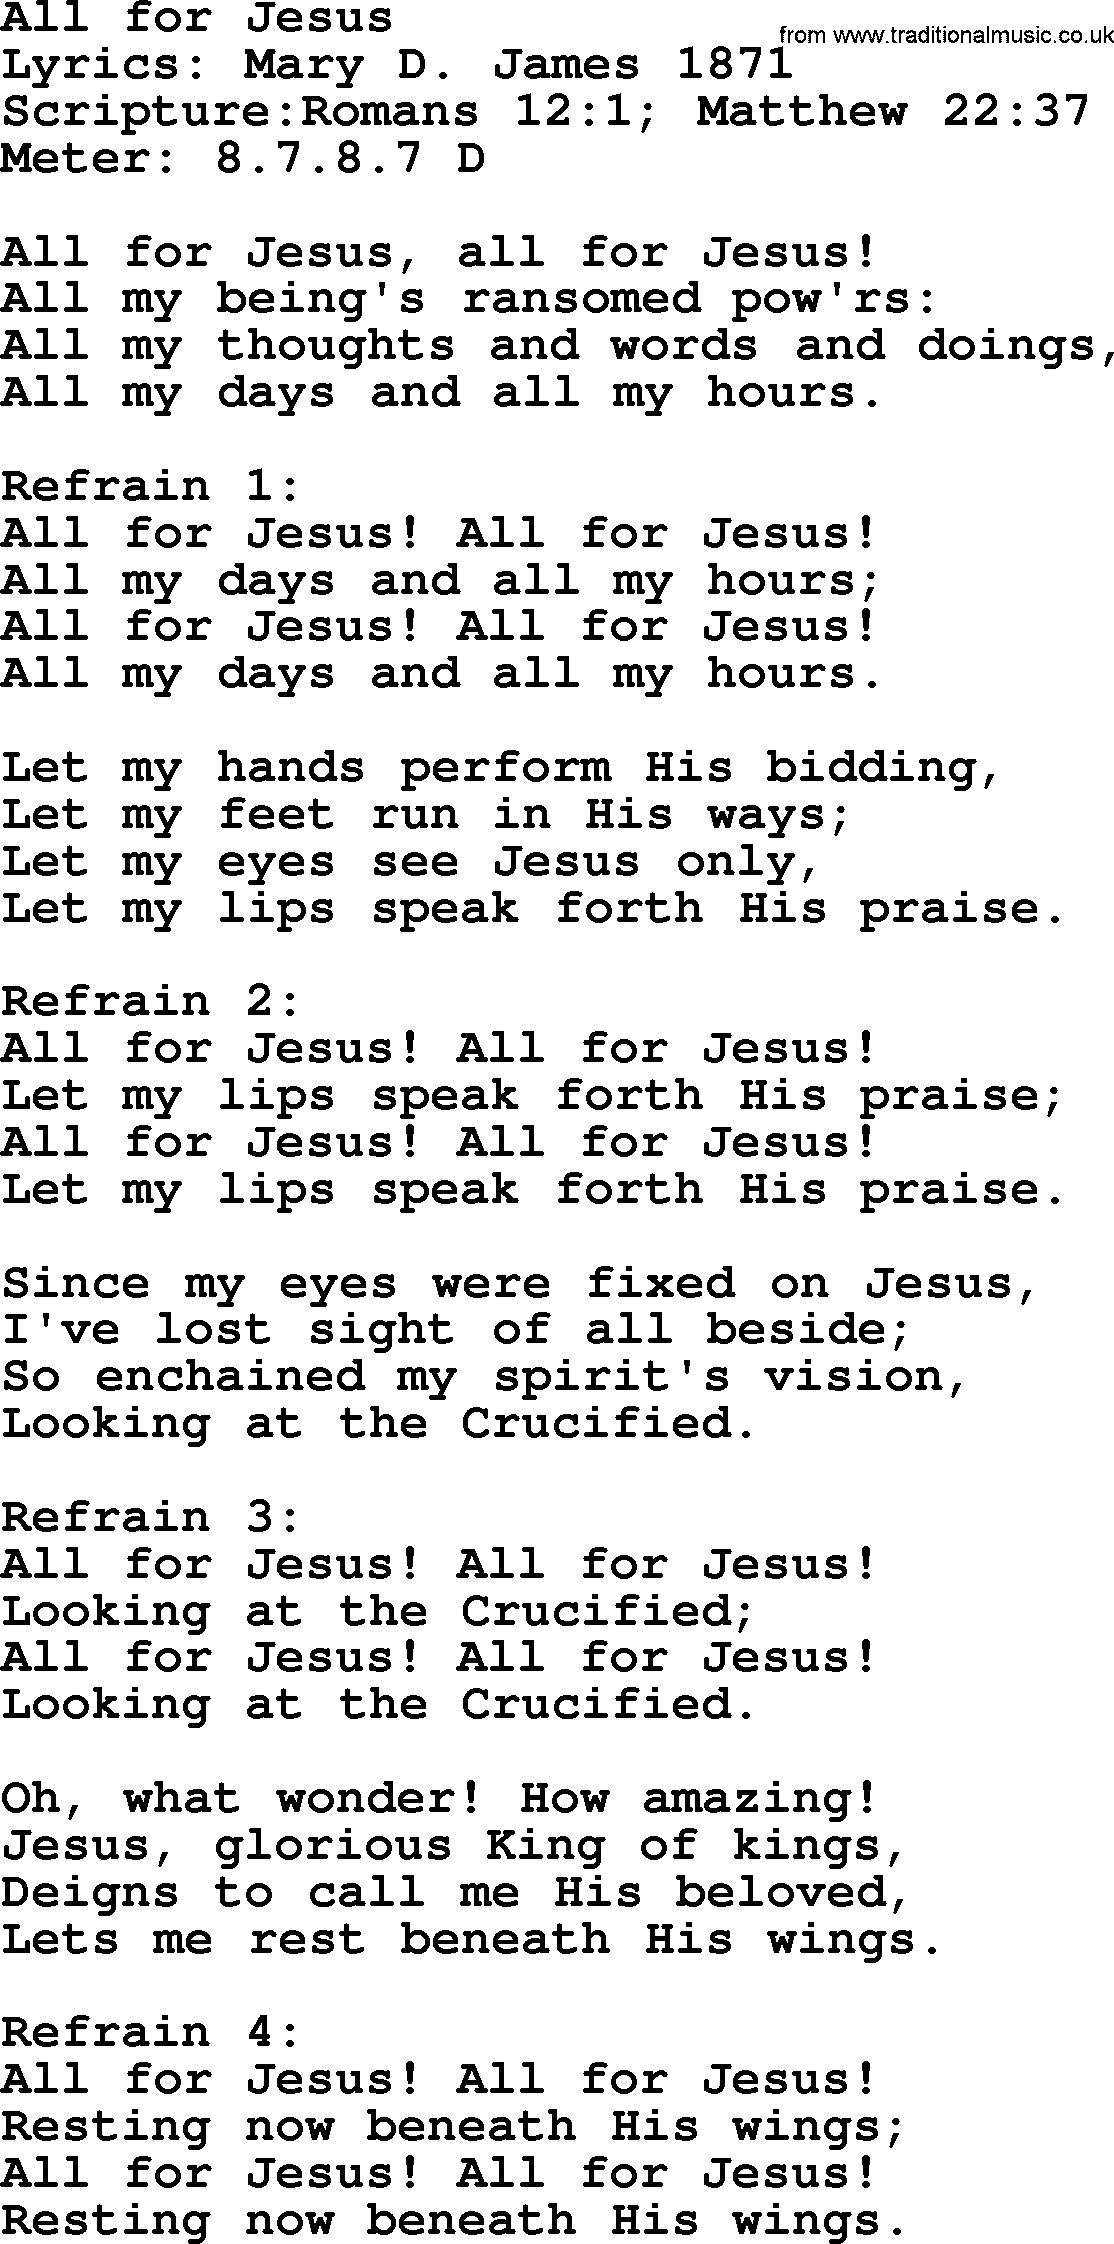 A collection of 500+ most sung Christian church hymns and songs, title: All For Jesus, lyrics, PPTX and PDF